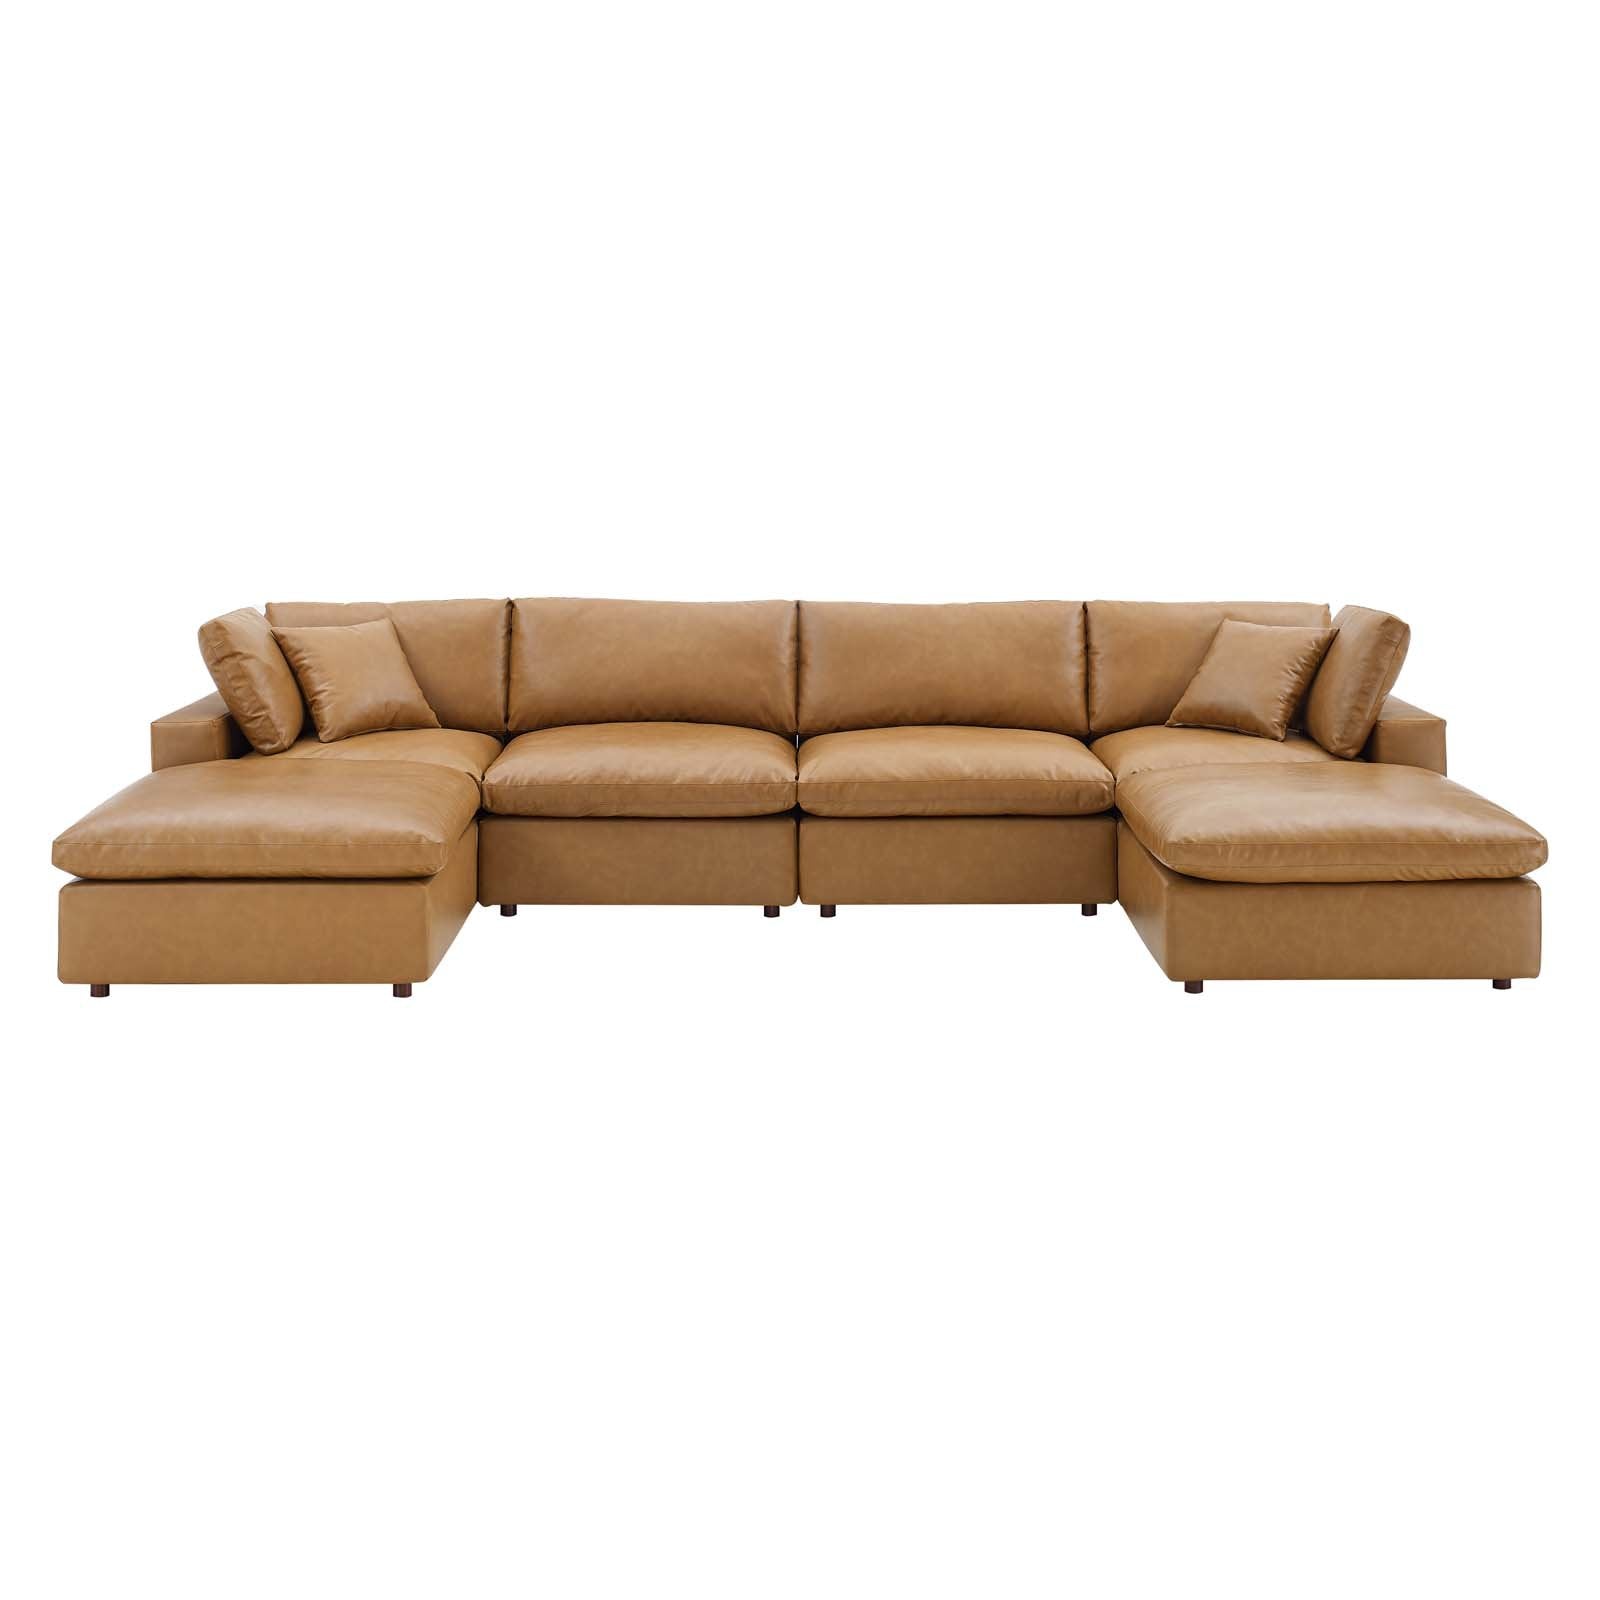 Commix Down Filled Overstuffed Vegan Leather 6-Piece Sectional Sofa - East Shore Modern Home Furnishings